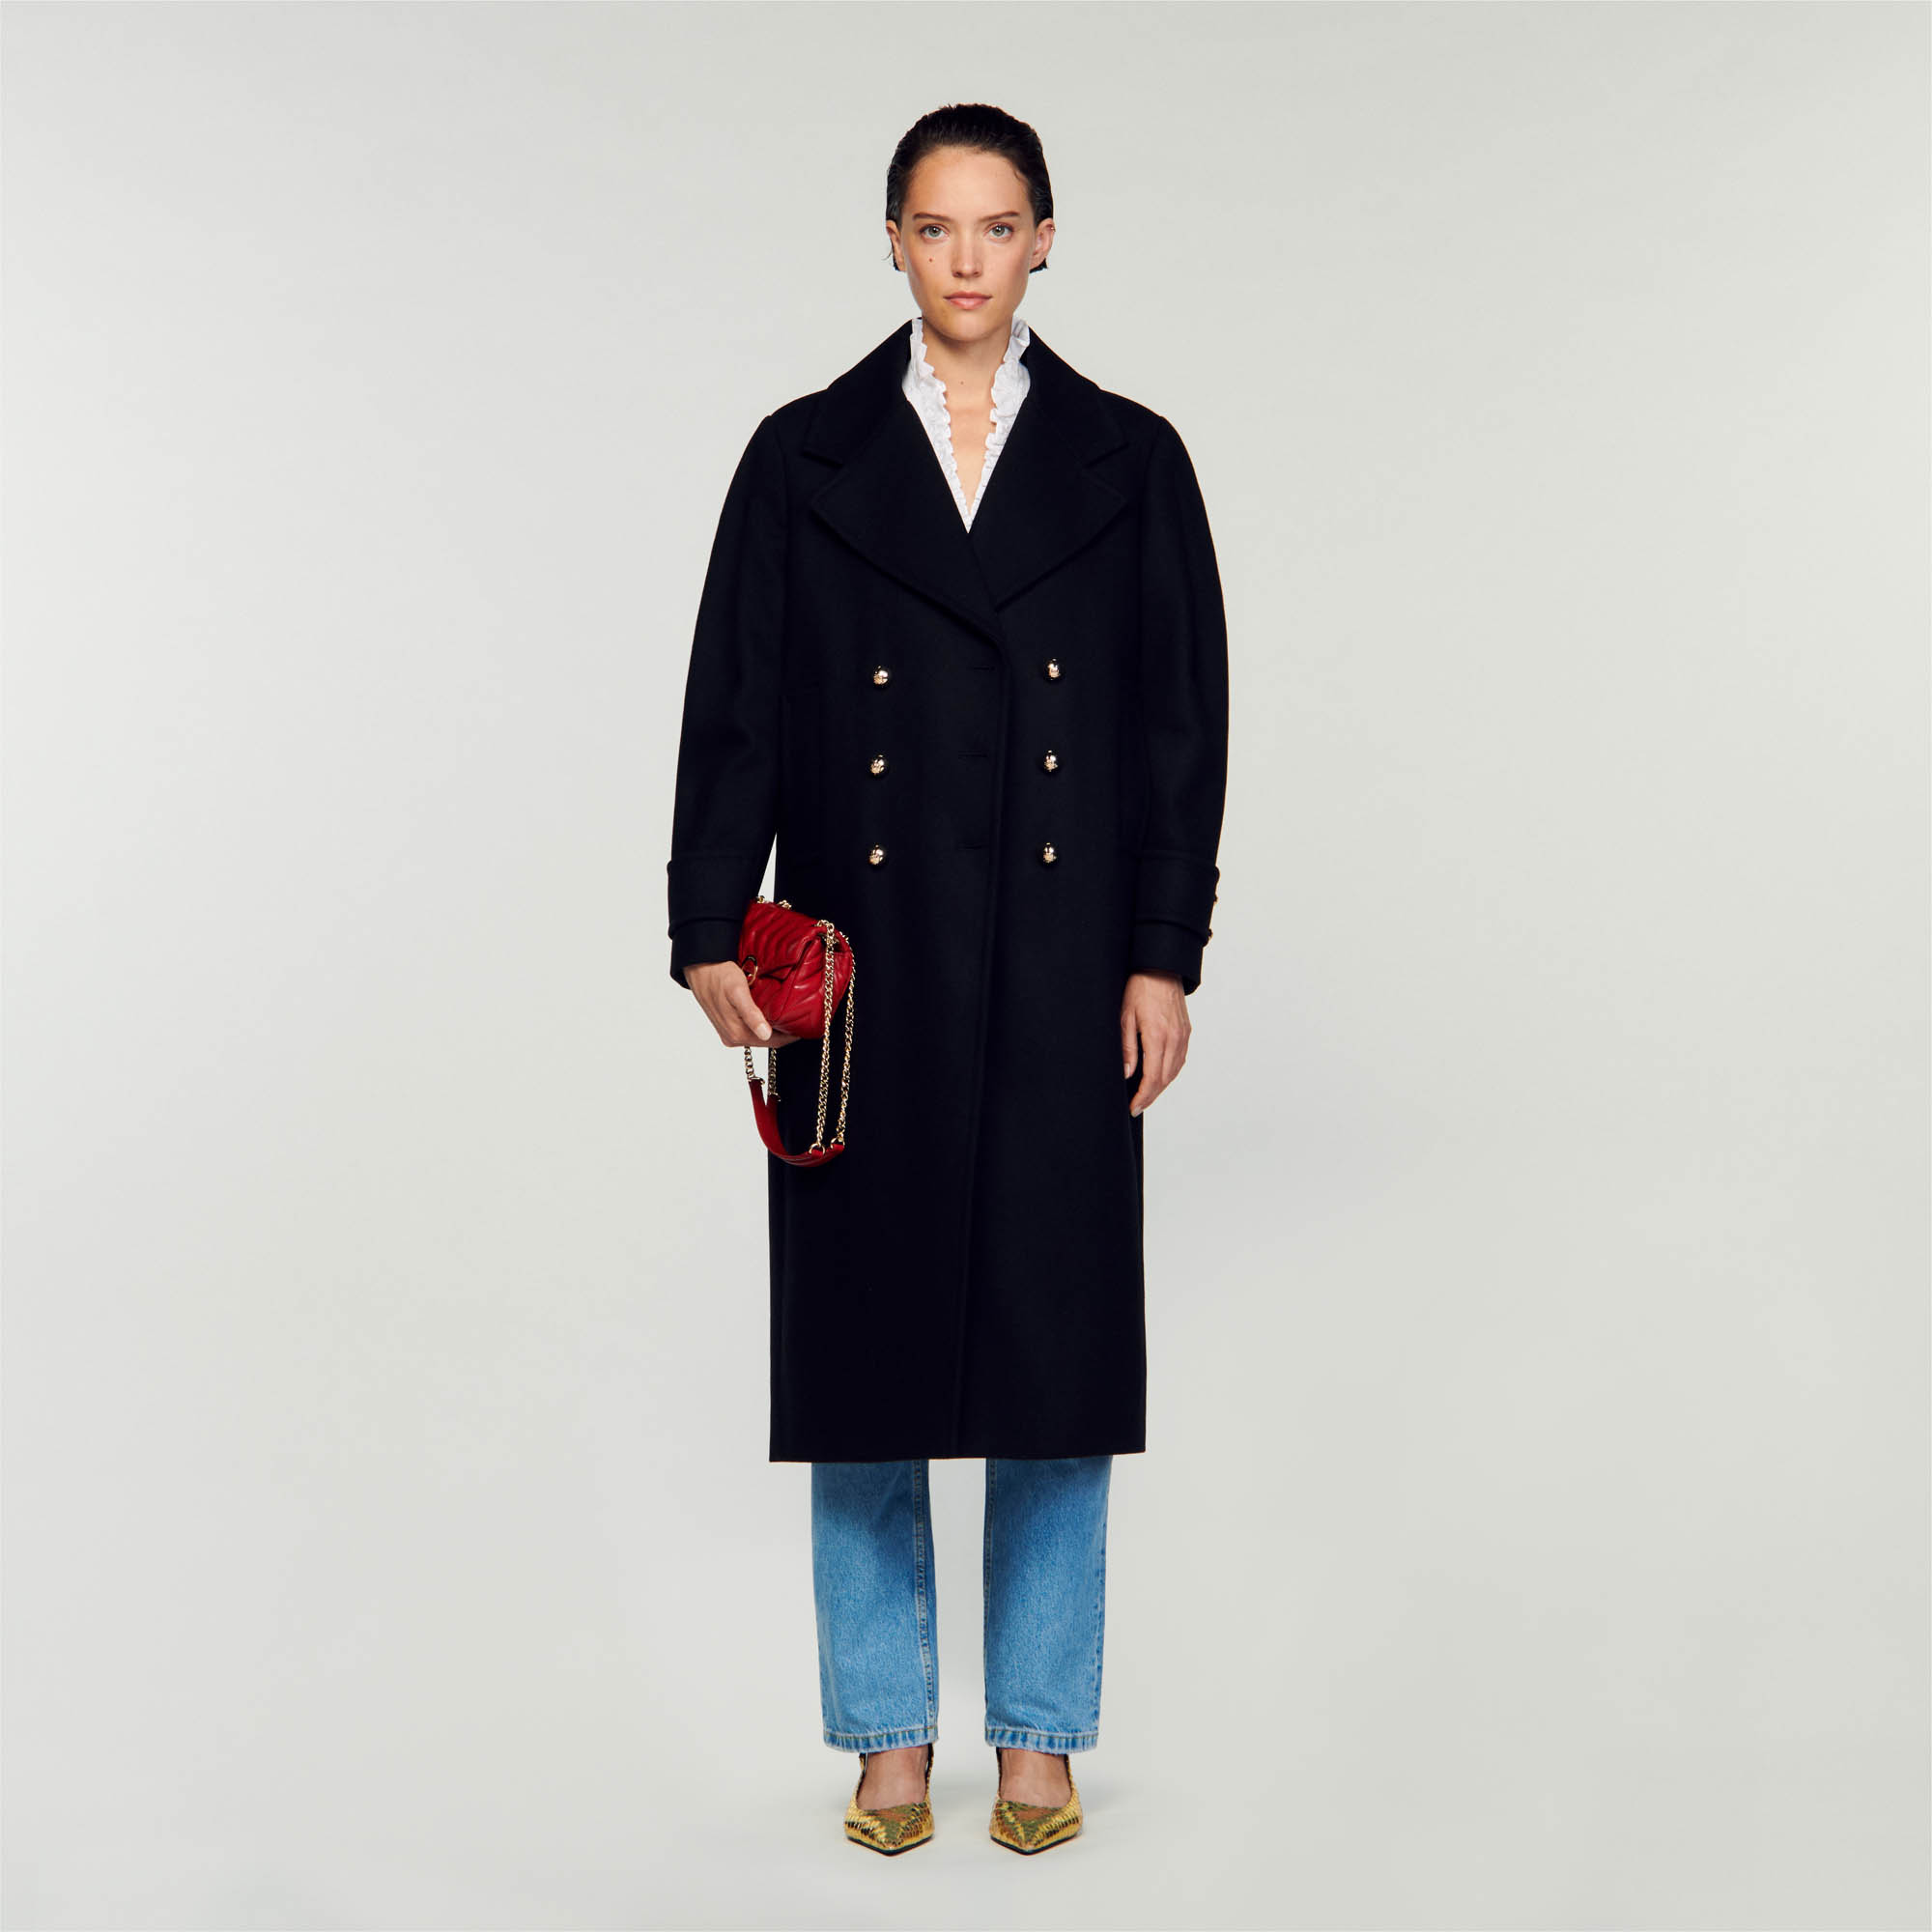 Sandro wool Long double-breasted coat with a large lapel collar, structured shoulders, long sleeves with tab cuffs and a martingale back